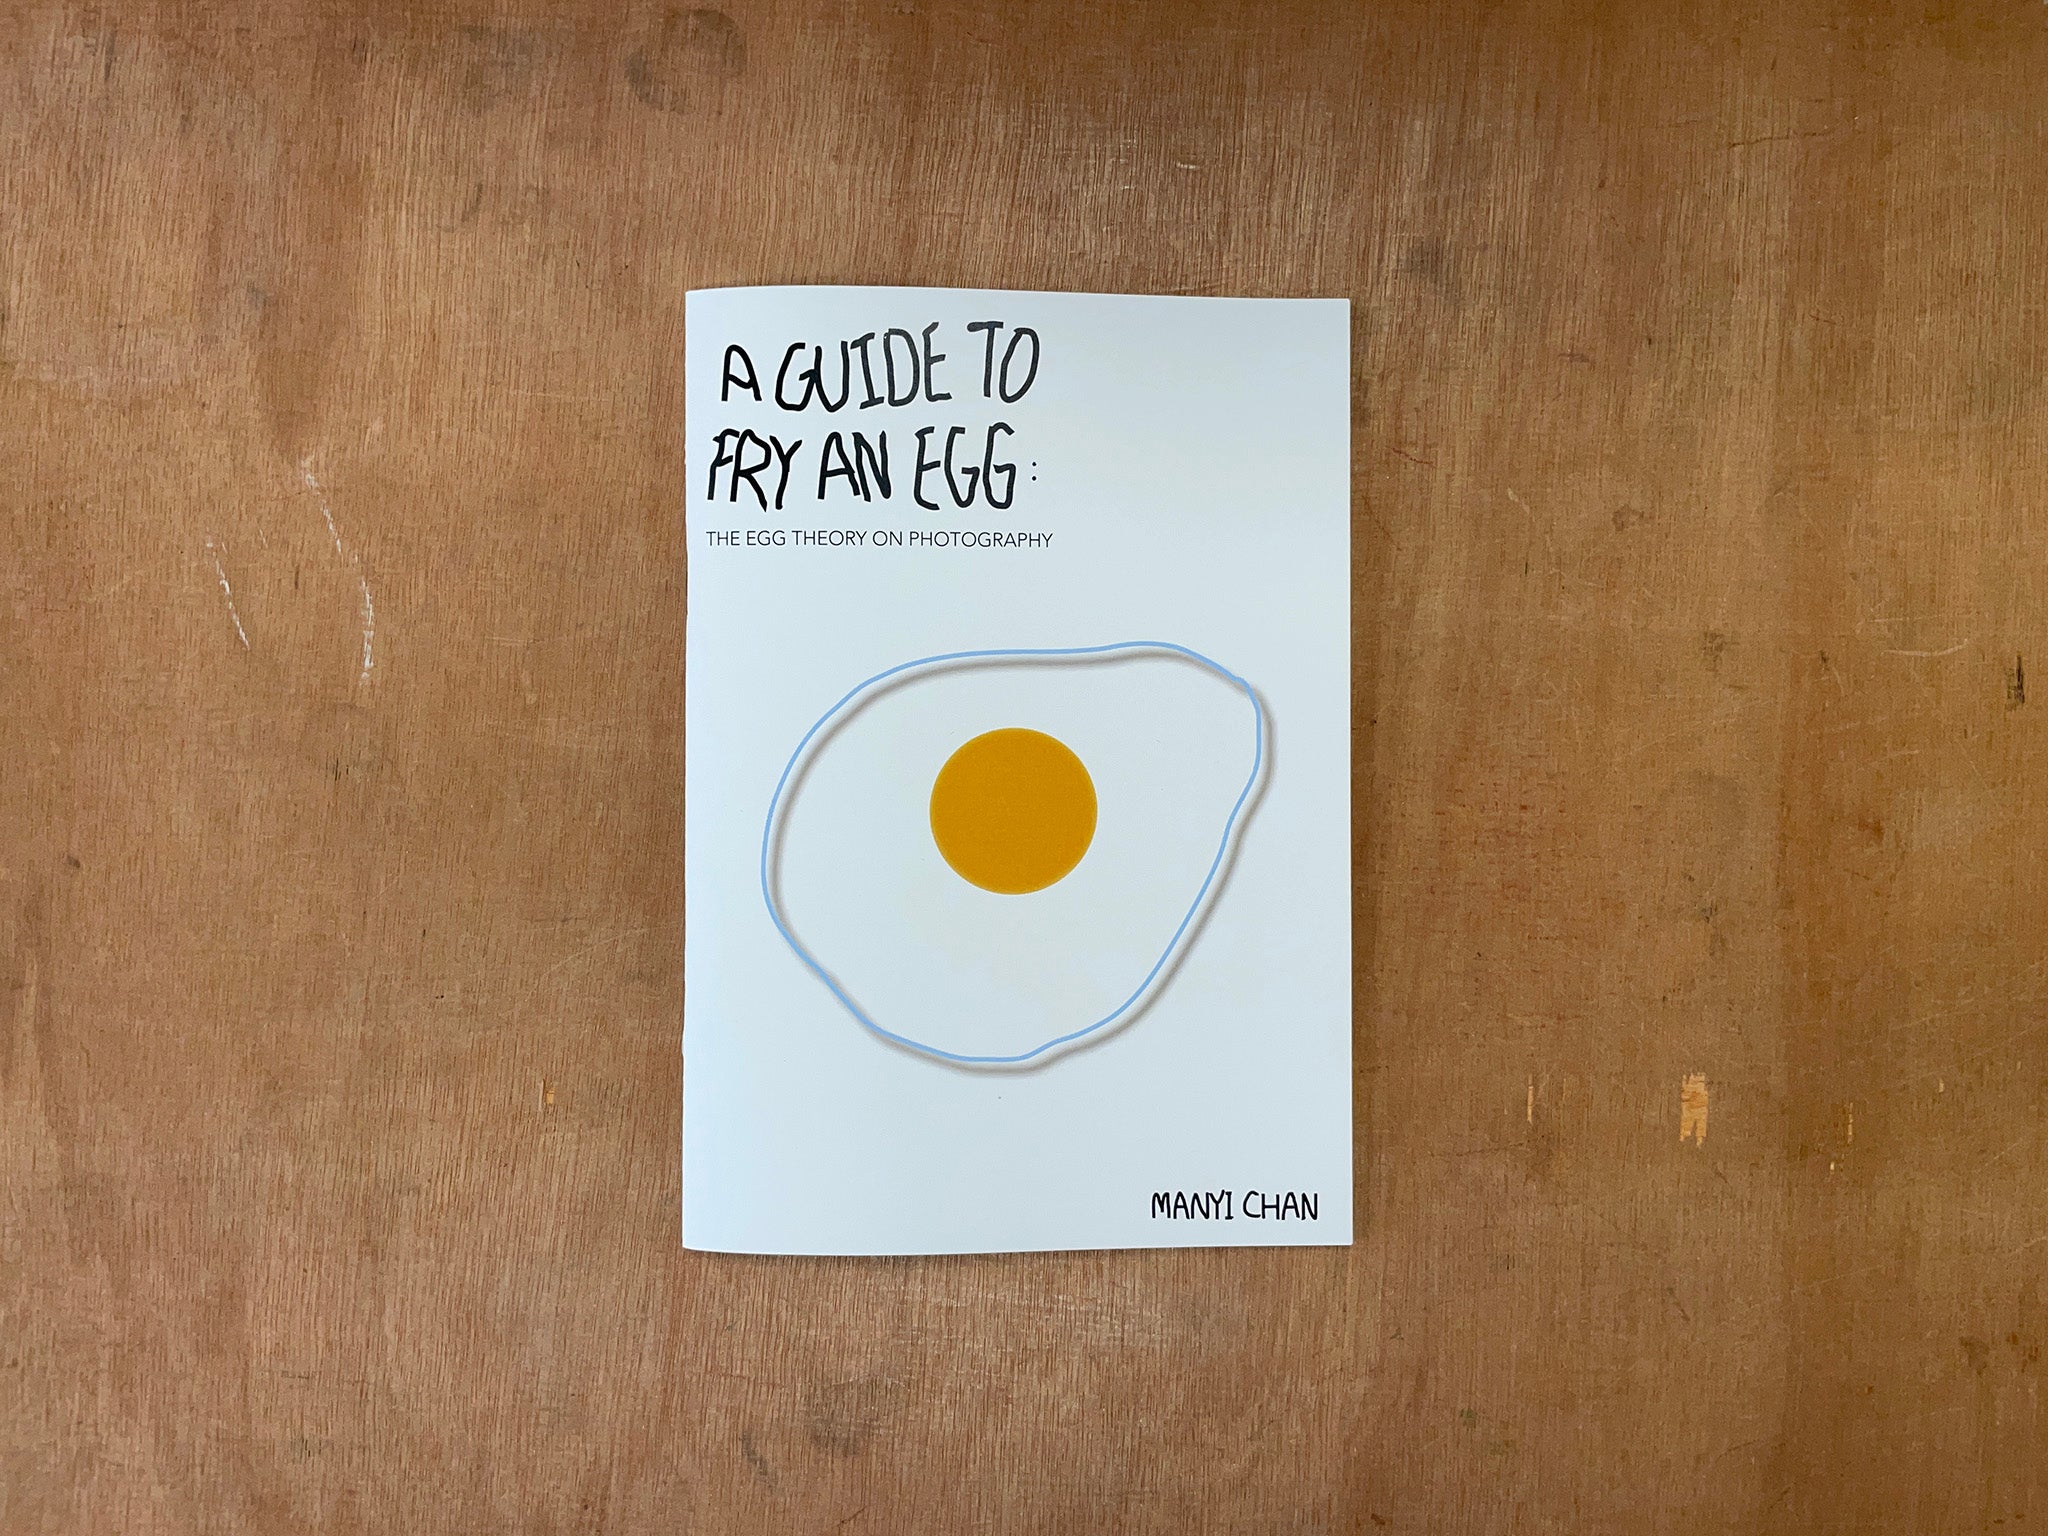 A GUIDE TO FRY AN EGG: THE EGG THEORY ON PHOTOGRAPHY by Manyi Chan